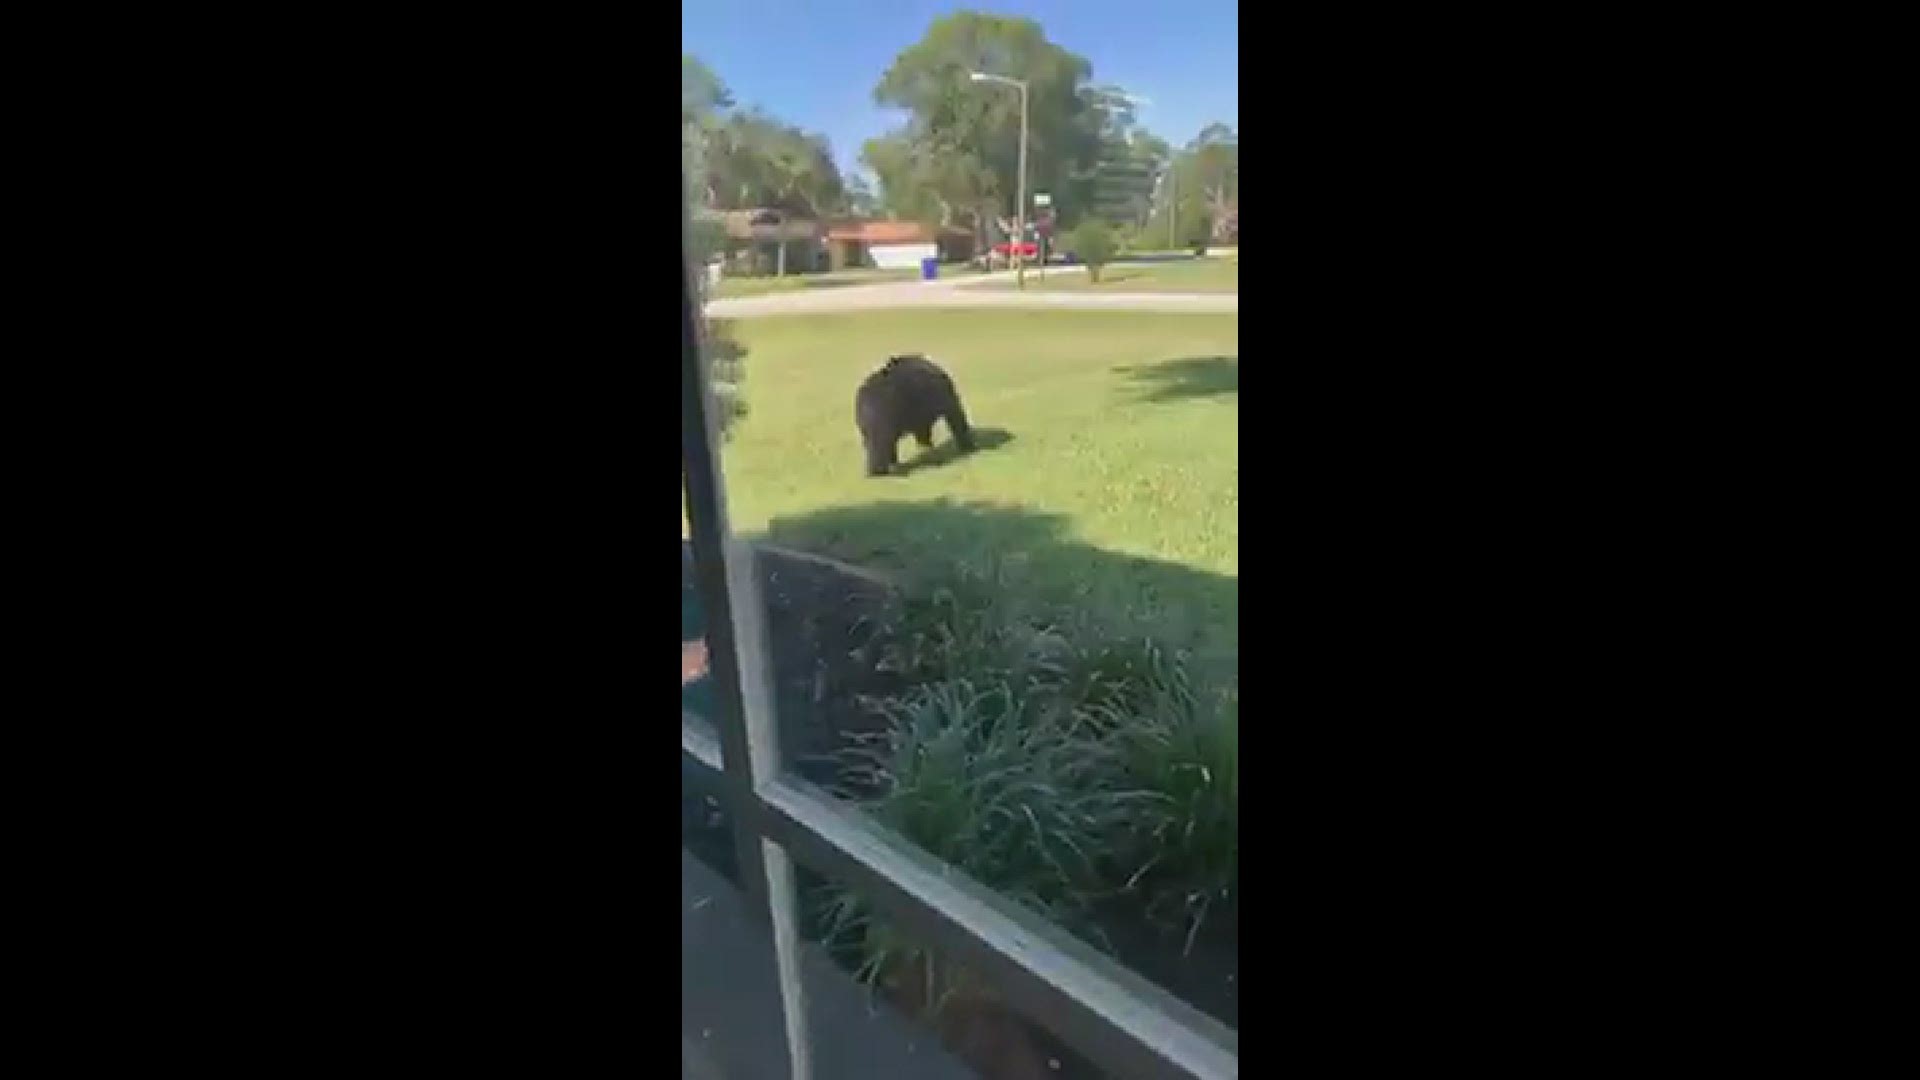 Sebring resident Stacy Ann Shoop captured video of a mama bear and her two cubs playing in Shoop’s front yard in the Harder Hall subdivision.